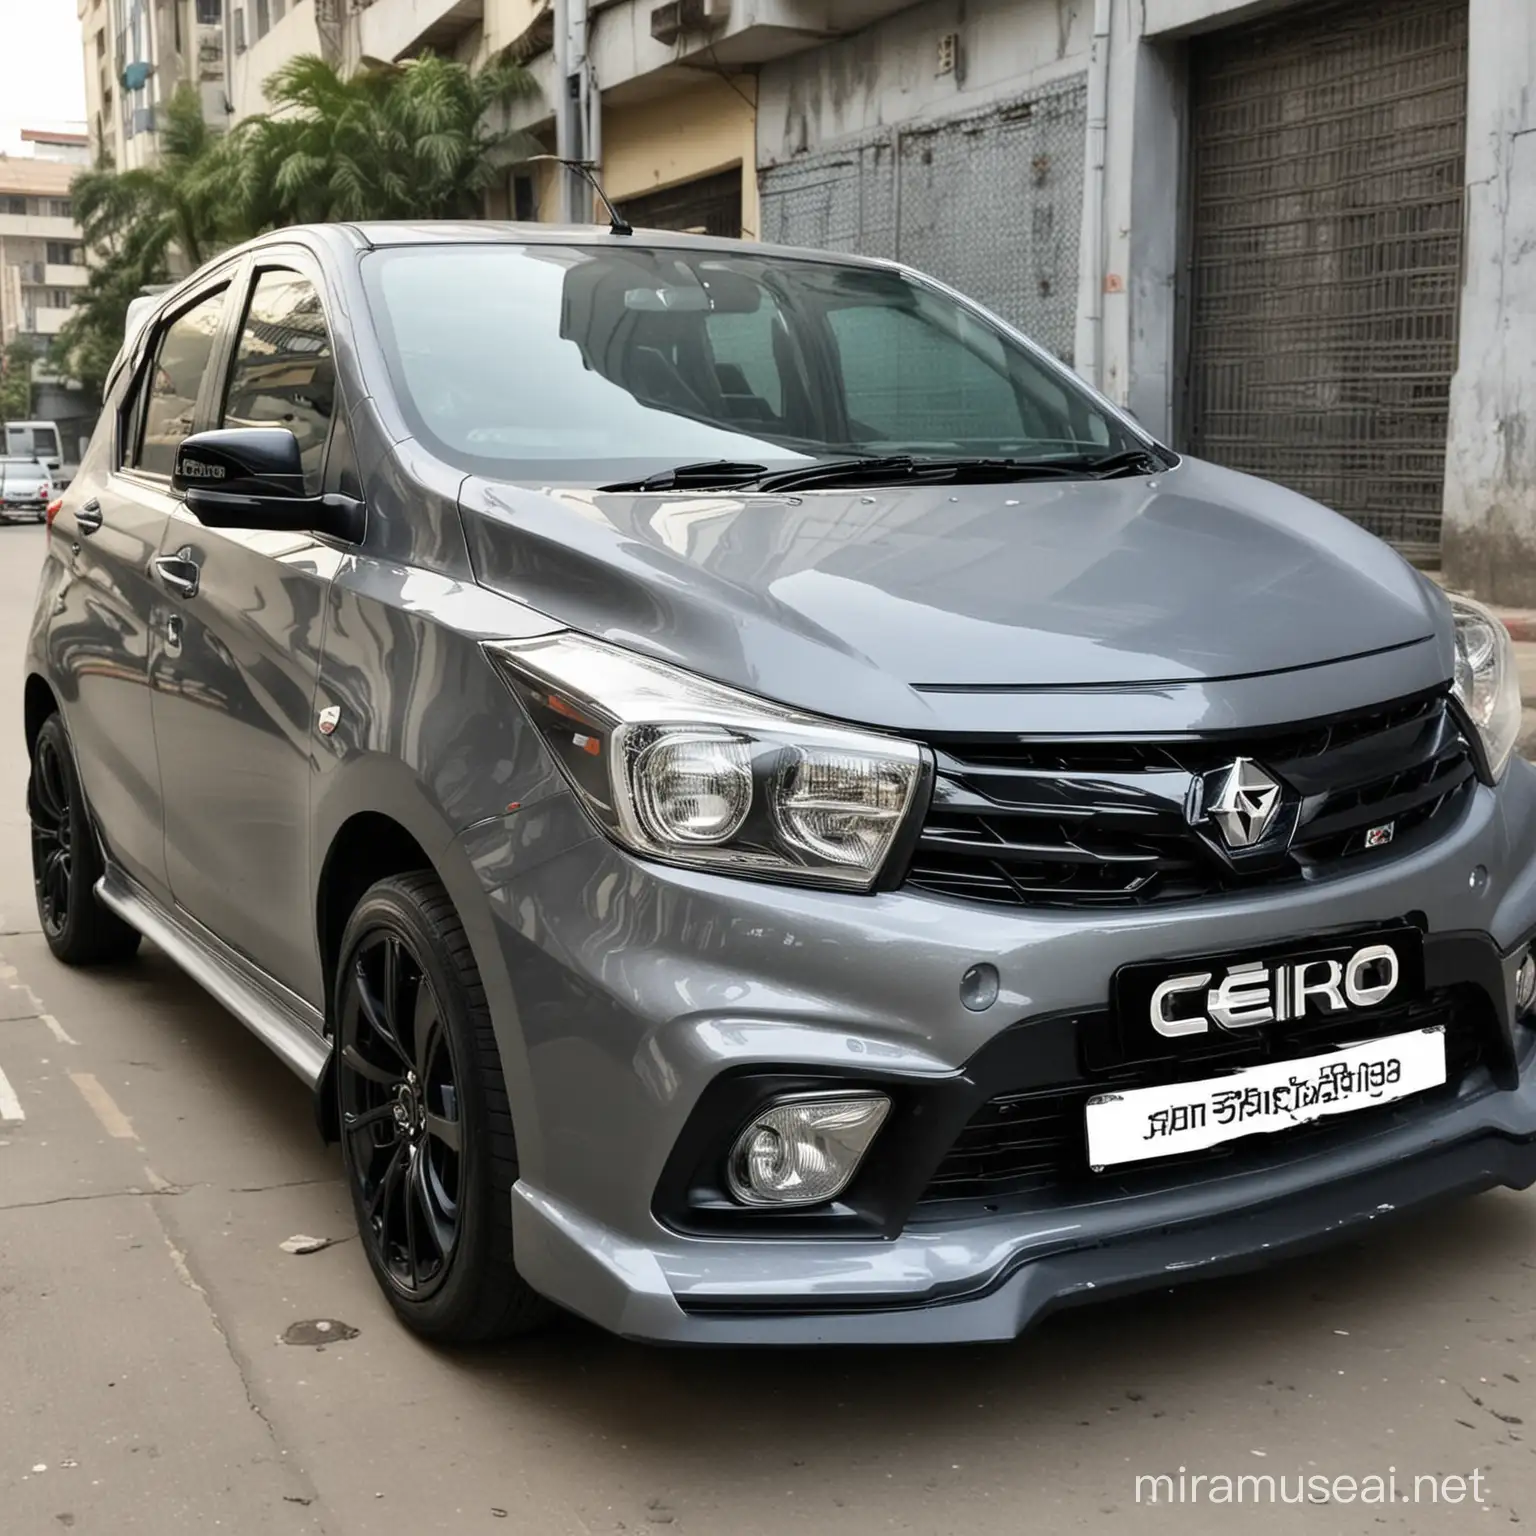 celerio in mat glossy grey colour with monster spoiler and modified headlights and rims
